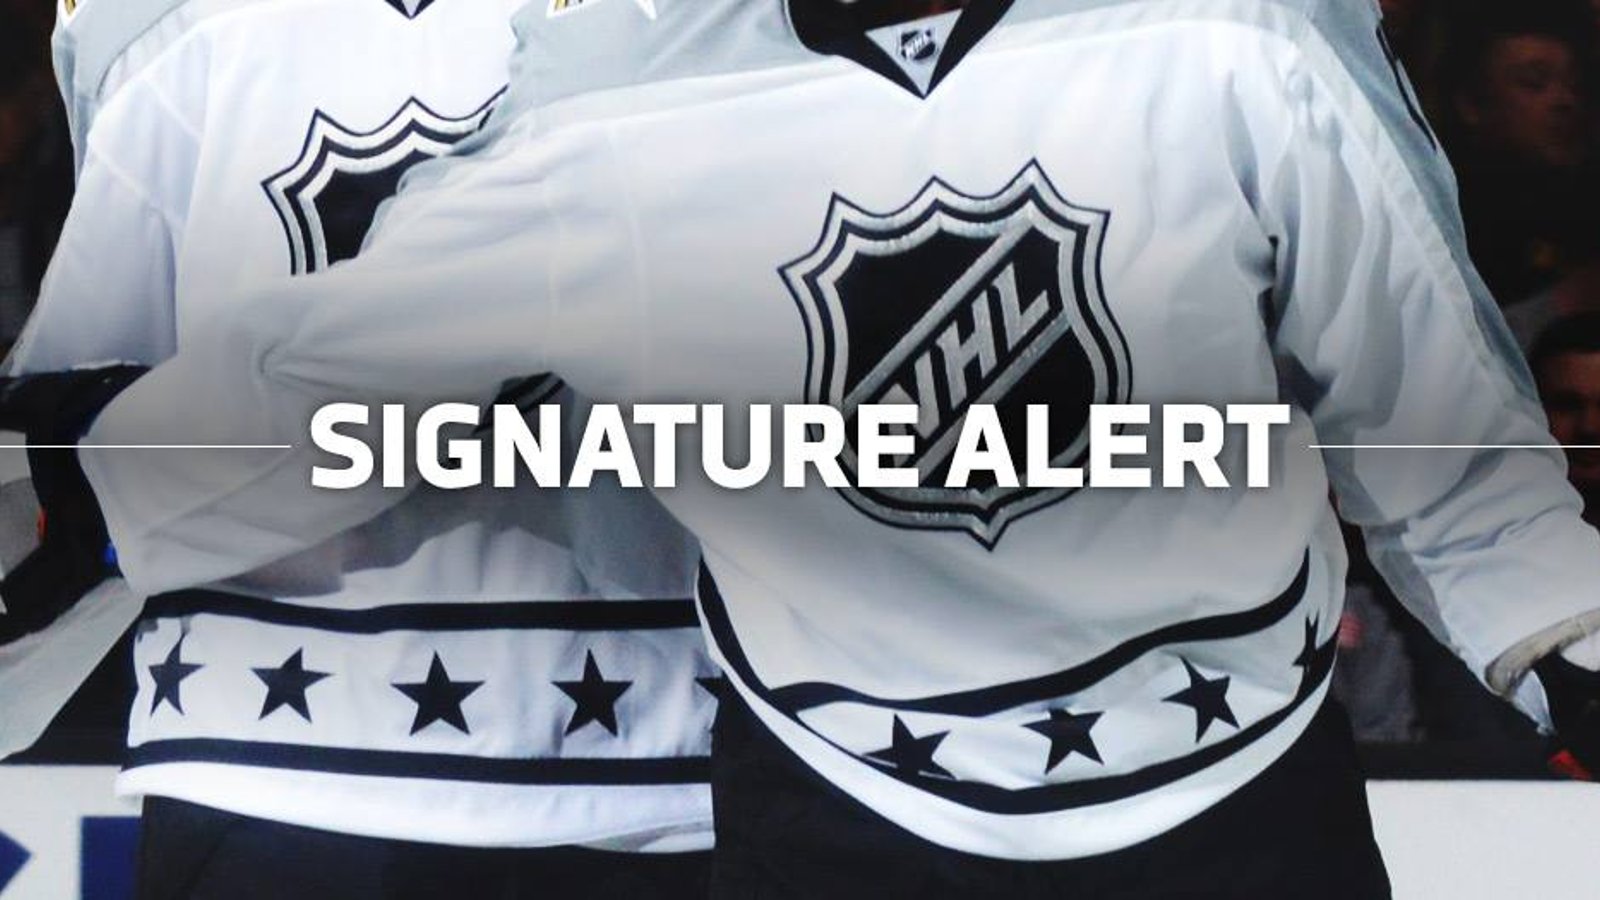 BREAKING: NHL superstar's little brother has just signed a tryout.